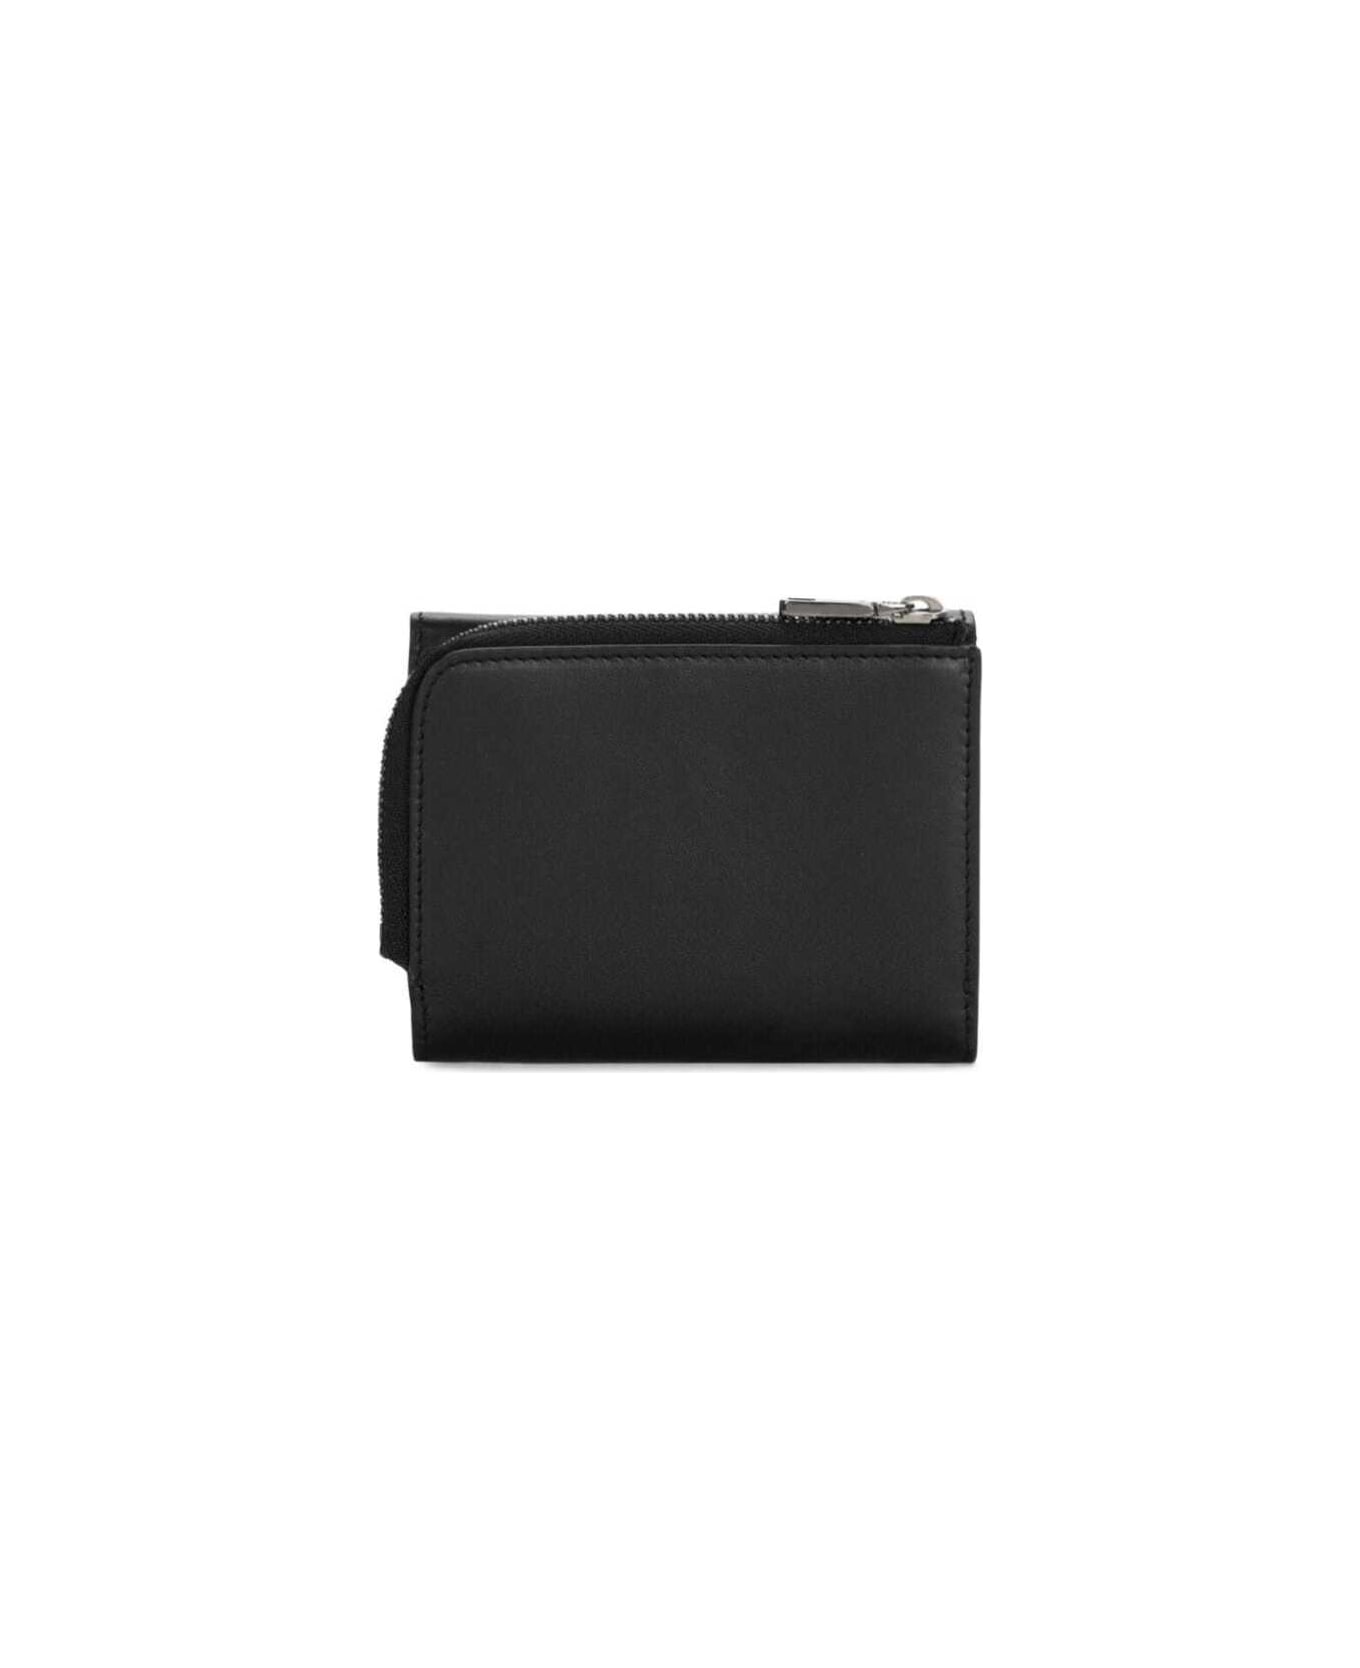 Dolce & Gabbana Black Wallet With Contrasting Logo Print In Leather Man - Black アクセサリー